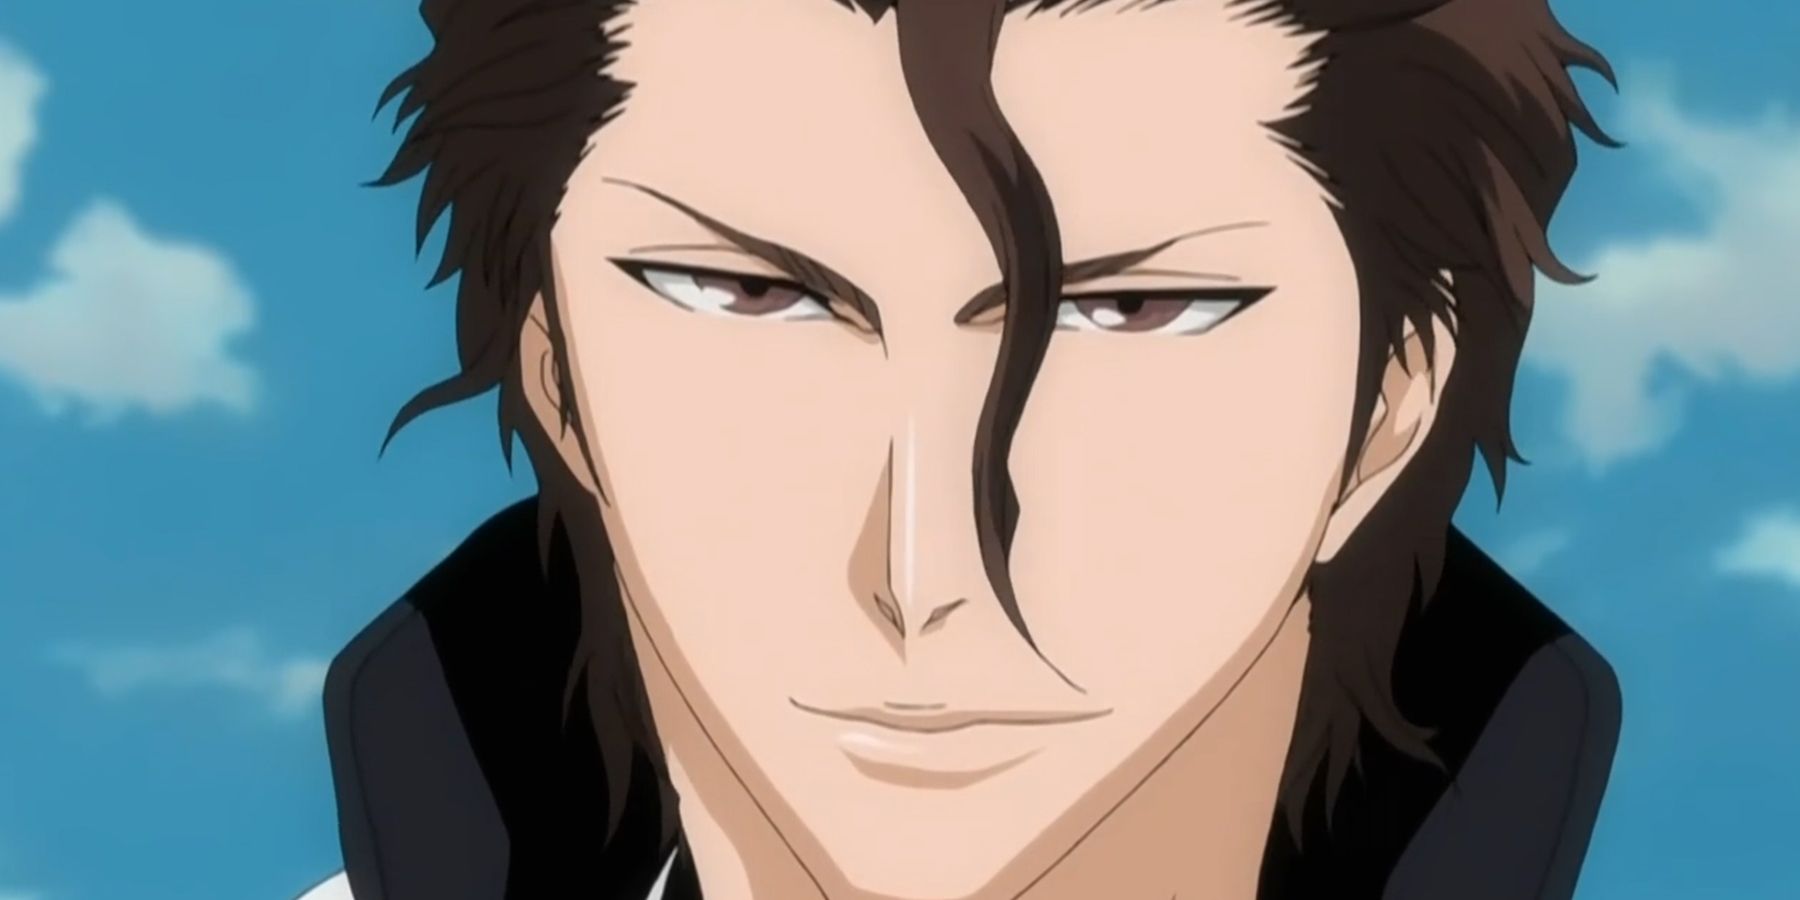 Sosuke Aizen, the former Soul Society Captain, smilingly with an evil grin during Bleach